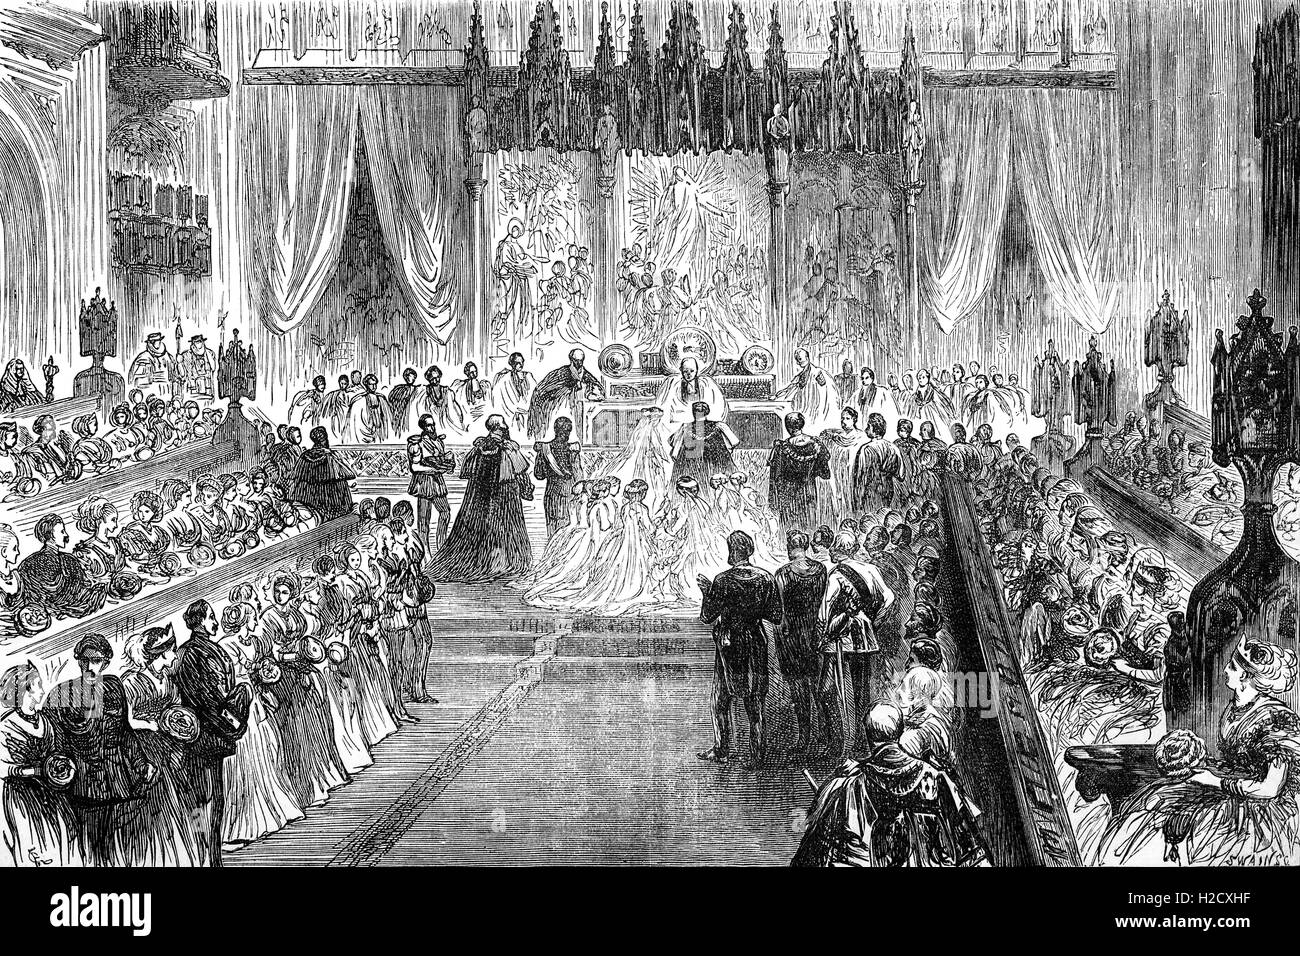 The wedding at St George's Chapel, Windsor Castle, of the Prince of Wales (1841 – 1910), who became King Edward VII,  to Alexandra of Denmark (1844 – 2925), Princess of Wales and later Queen Consort, on 10 March 1863. Stock Photo